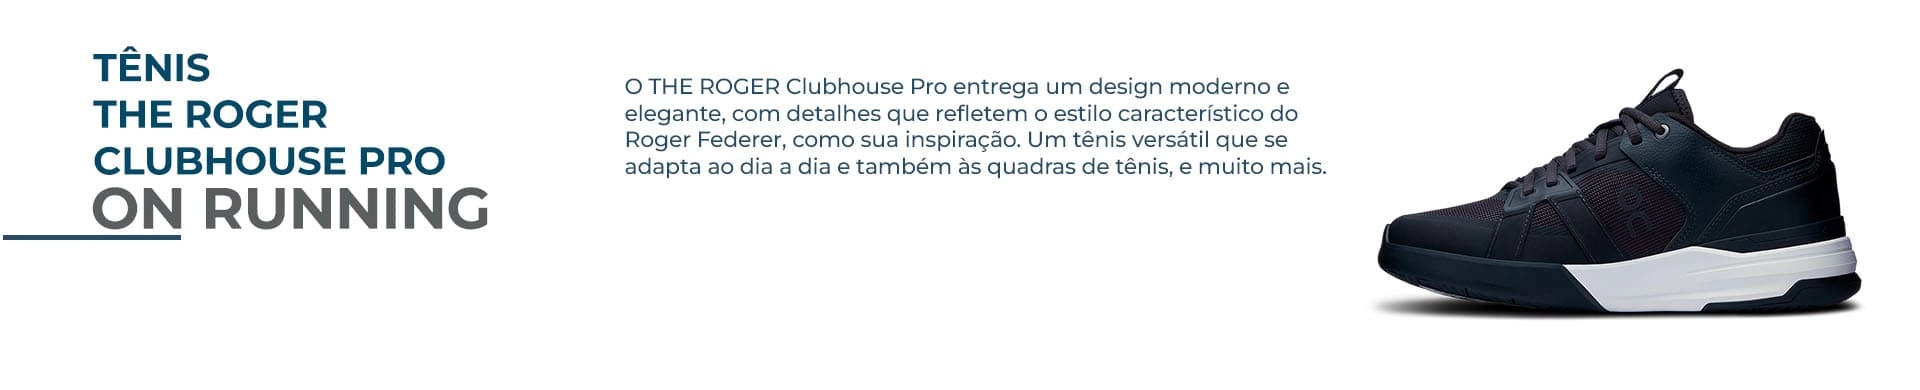 On The Roger Clubhouse Pro Feminino